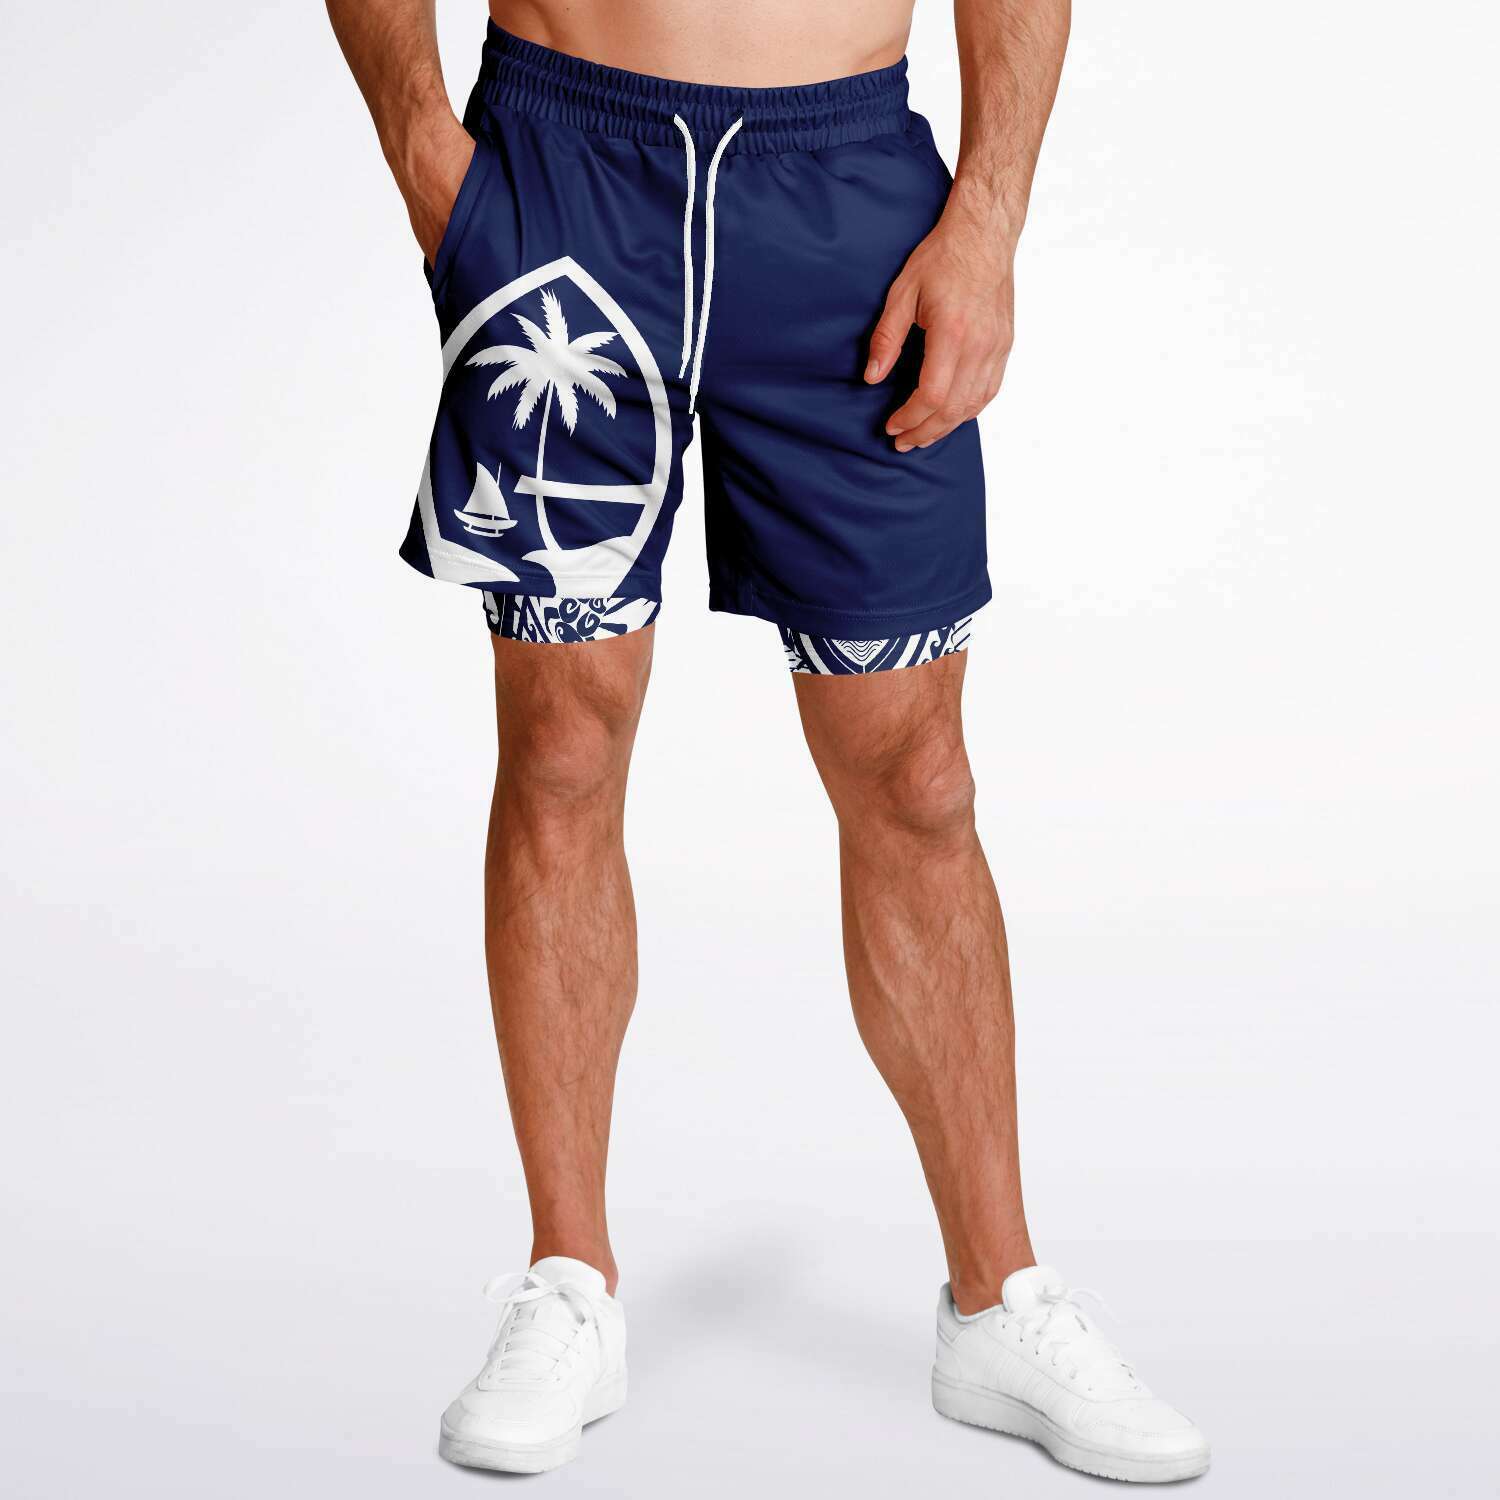 Guam Tribal Layer Blue 2-in-1 Phone Pocket Active Shorts